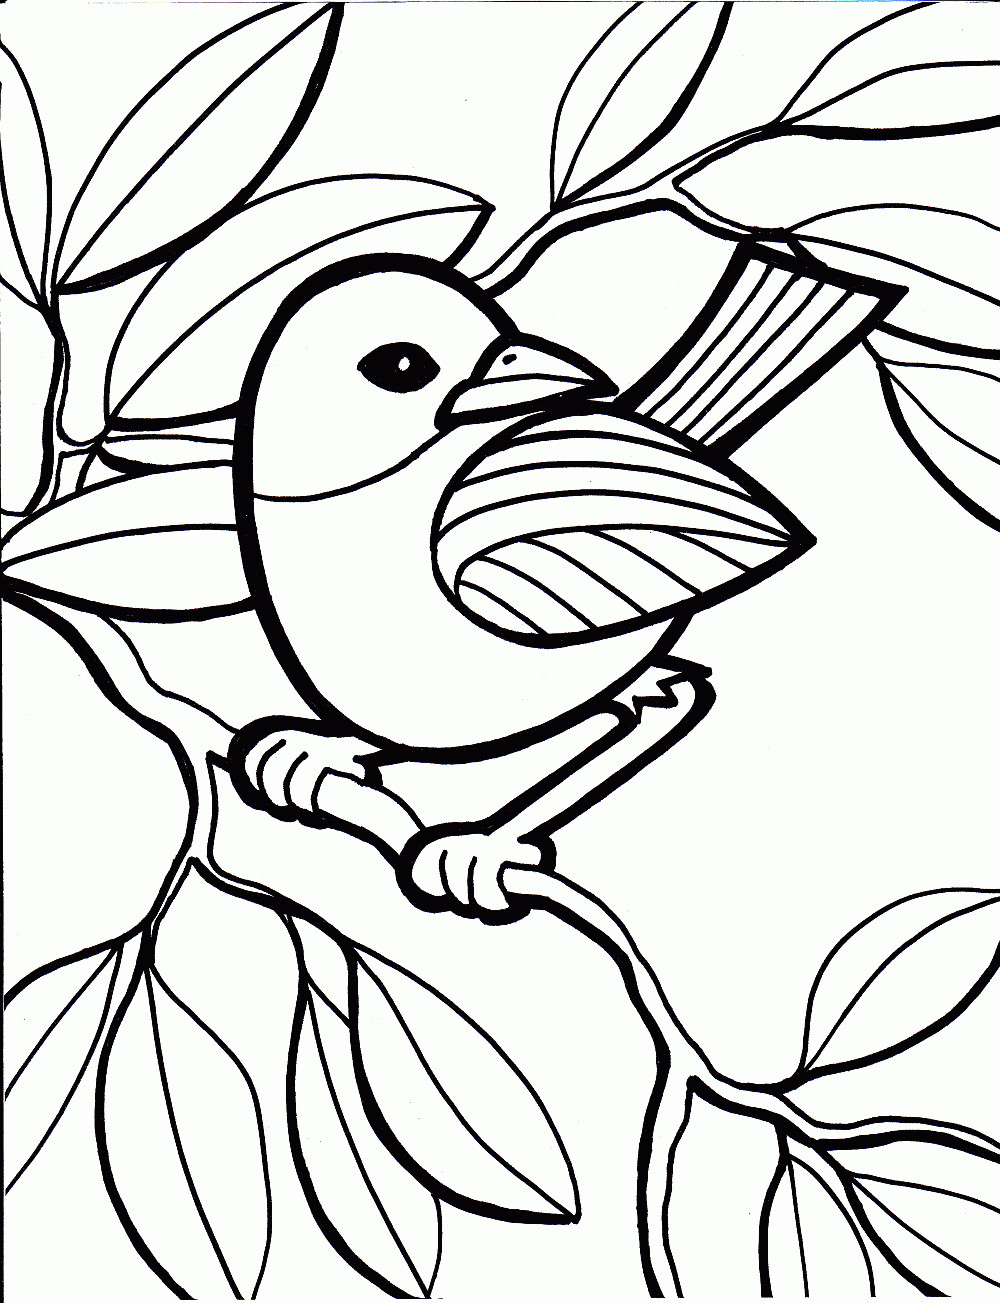 Online Coloring Book For Kids
 Free Coloring Pages For Kids Top Profile